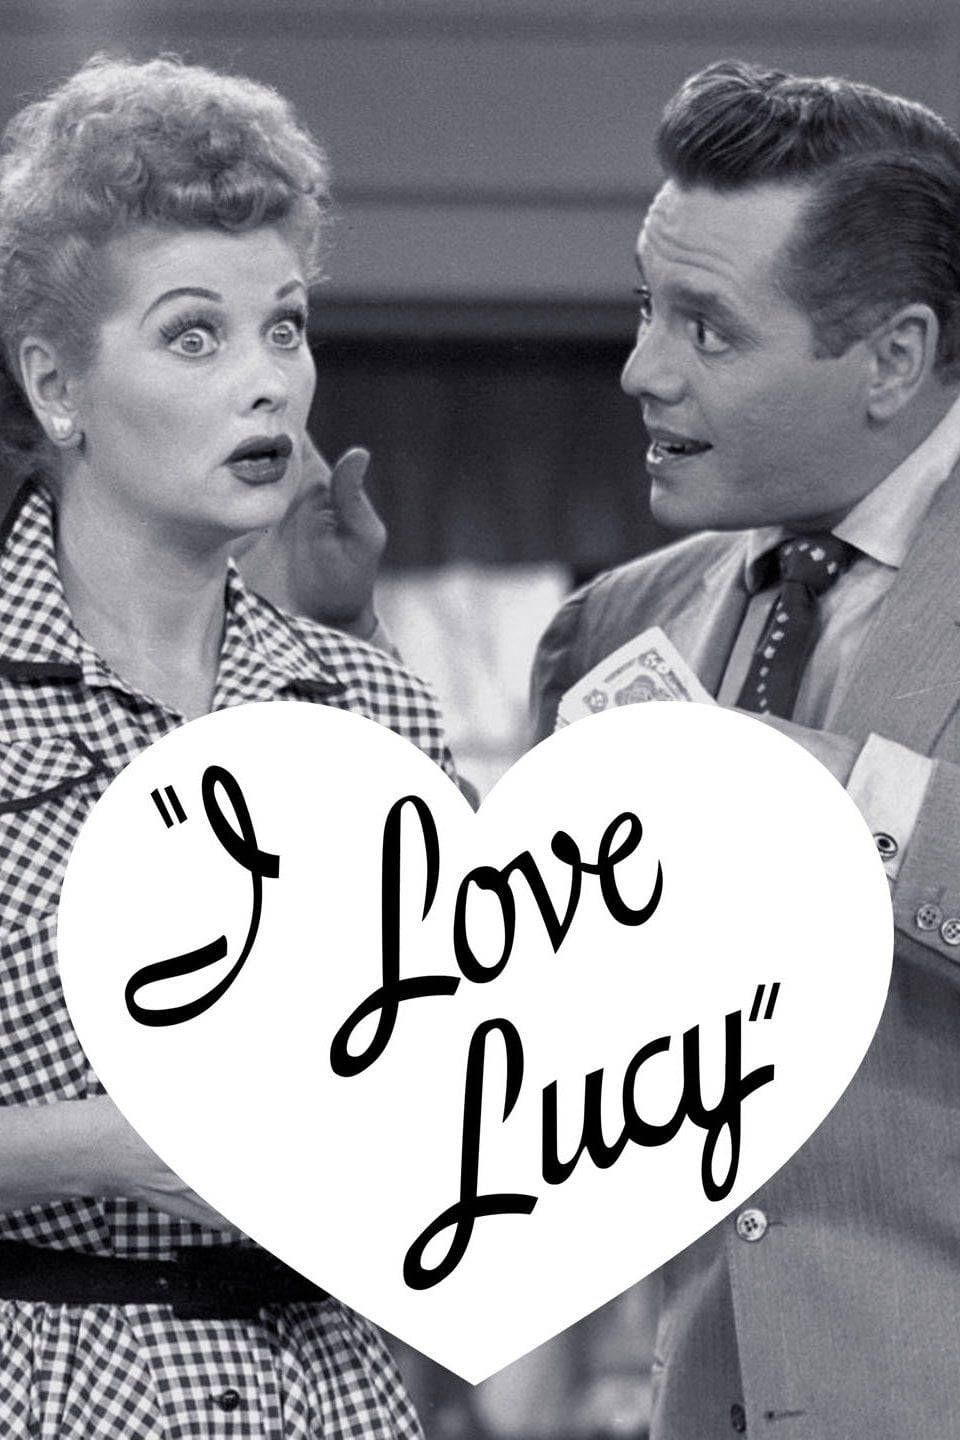 Lucille Ball And Desi Arnaz - The Icons Of 'i Love Lucy'